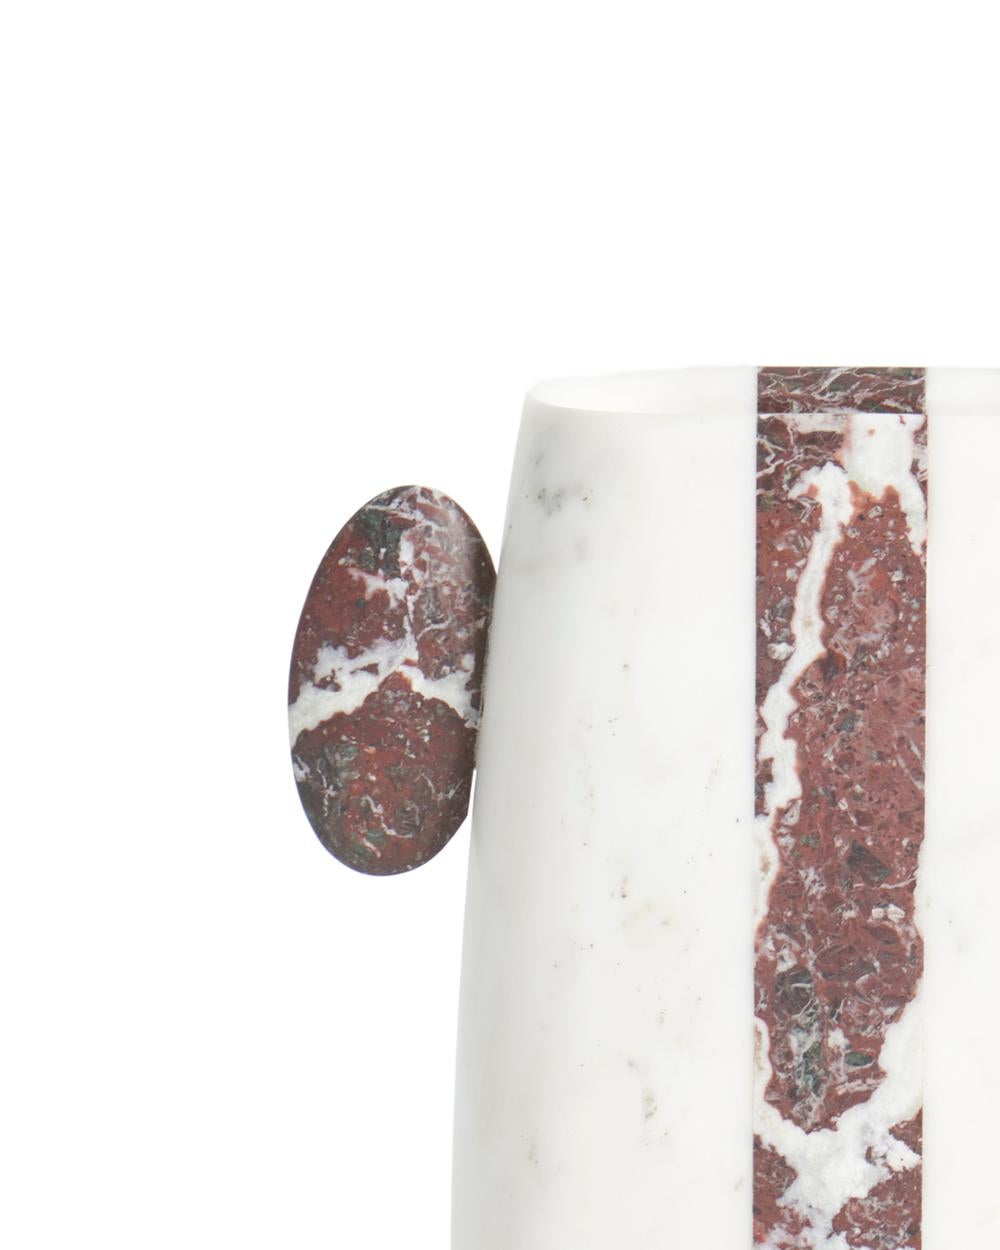 
Vase in White Michelangelo, Red Levanto and Black Marquinia marbles.
Size: 27.3 x 38.4 x 7.3 cm, smooth finishing. Commercial name: Pietro, Homage collection by the Italian designer Matteo Cibic. Made in Italy, hand finished.
“A painter’s drawings